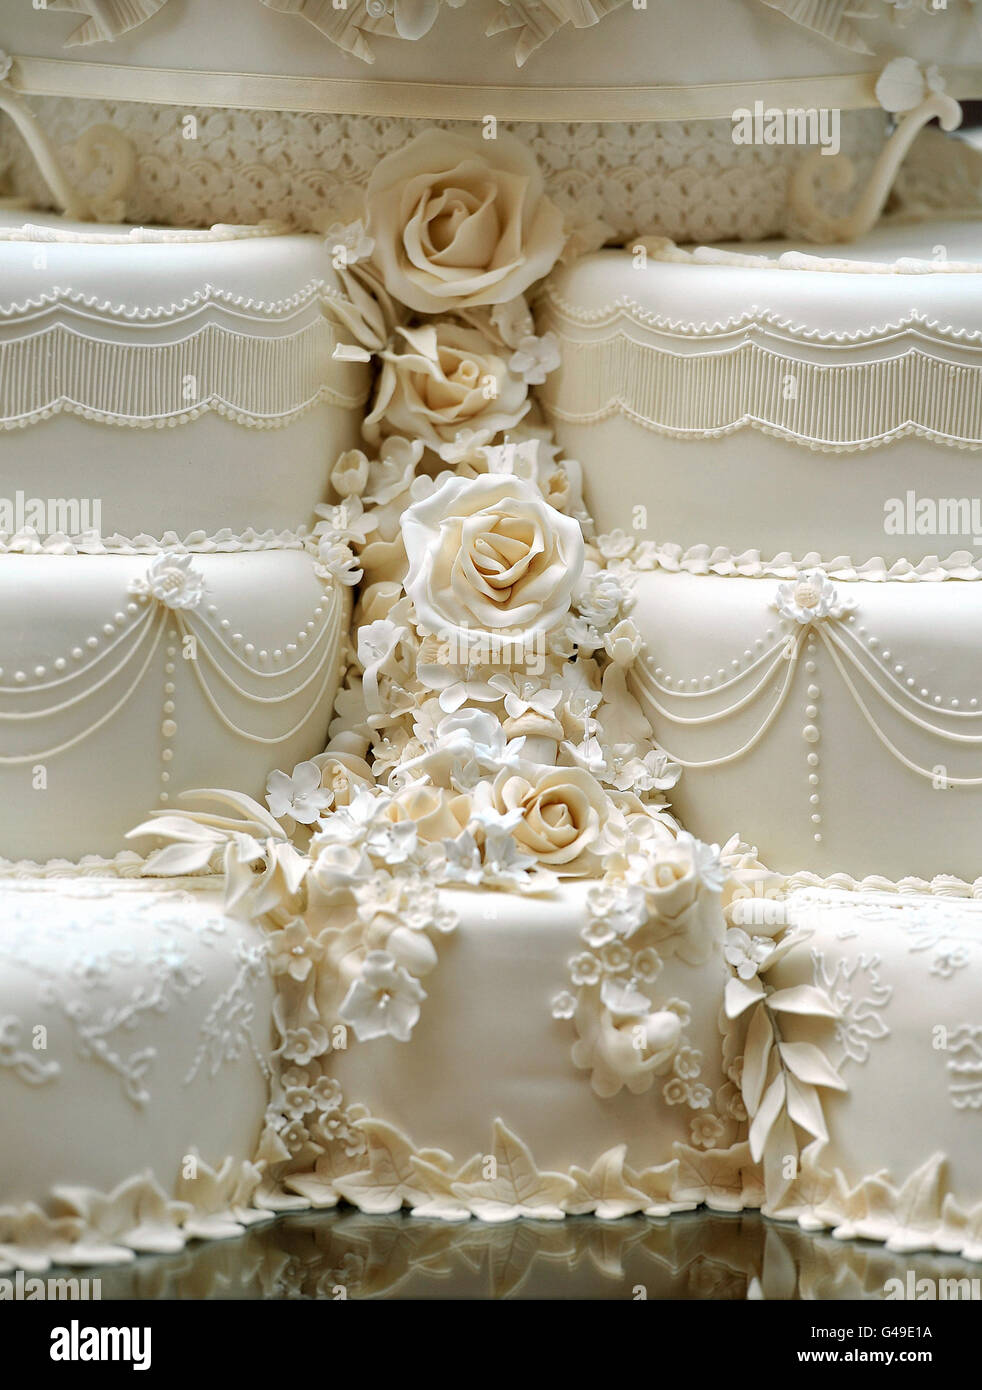 A small section of the eight tiered wedding cake with the initials W & C, made by Fiona Cairns and her team, awaits the newly weds Prince William and Kate in